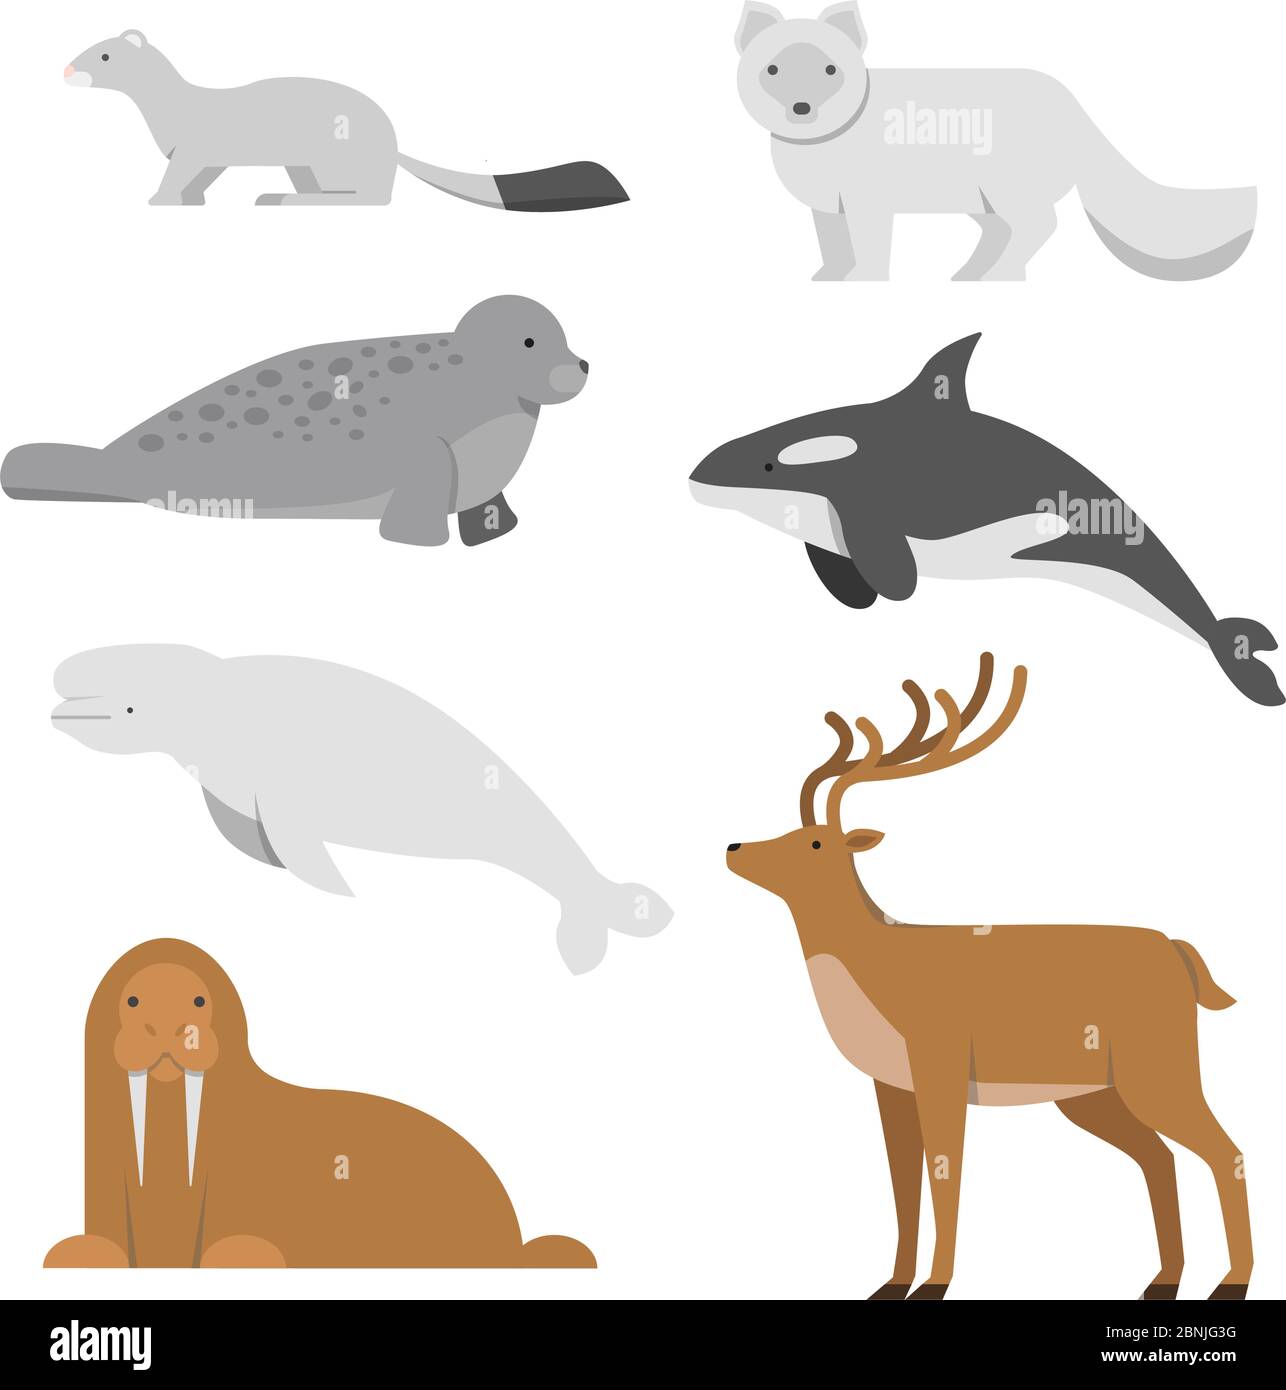 Northern and arctic animals. Vector illustrations in flat style Stock Vector